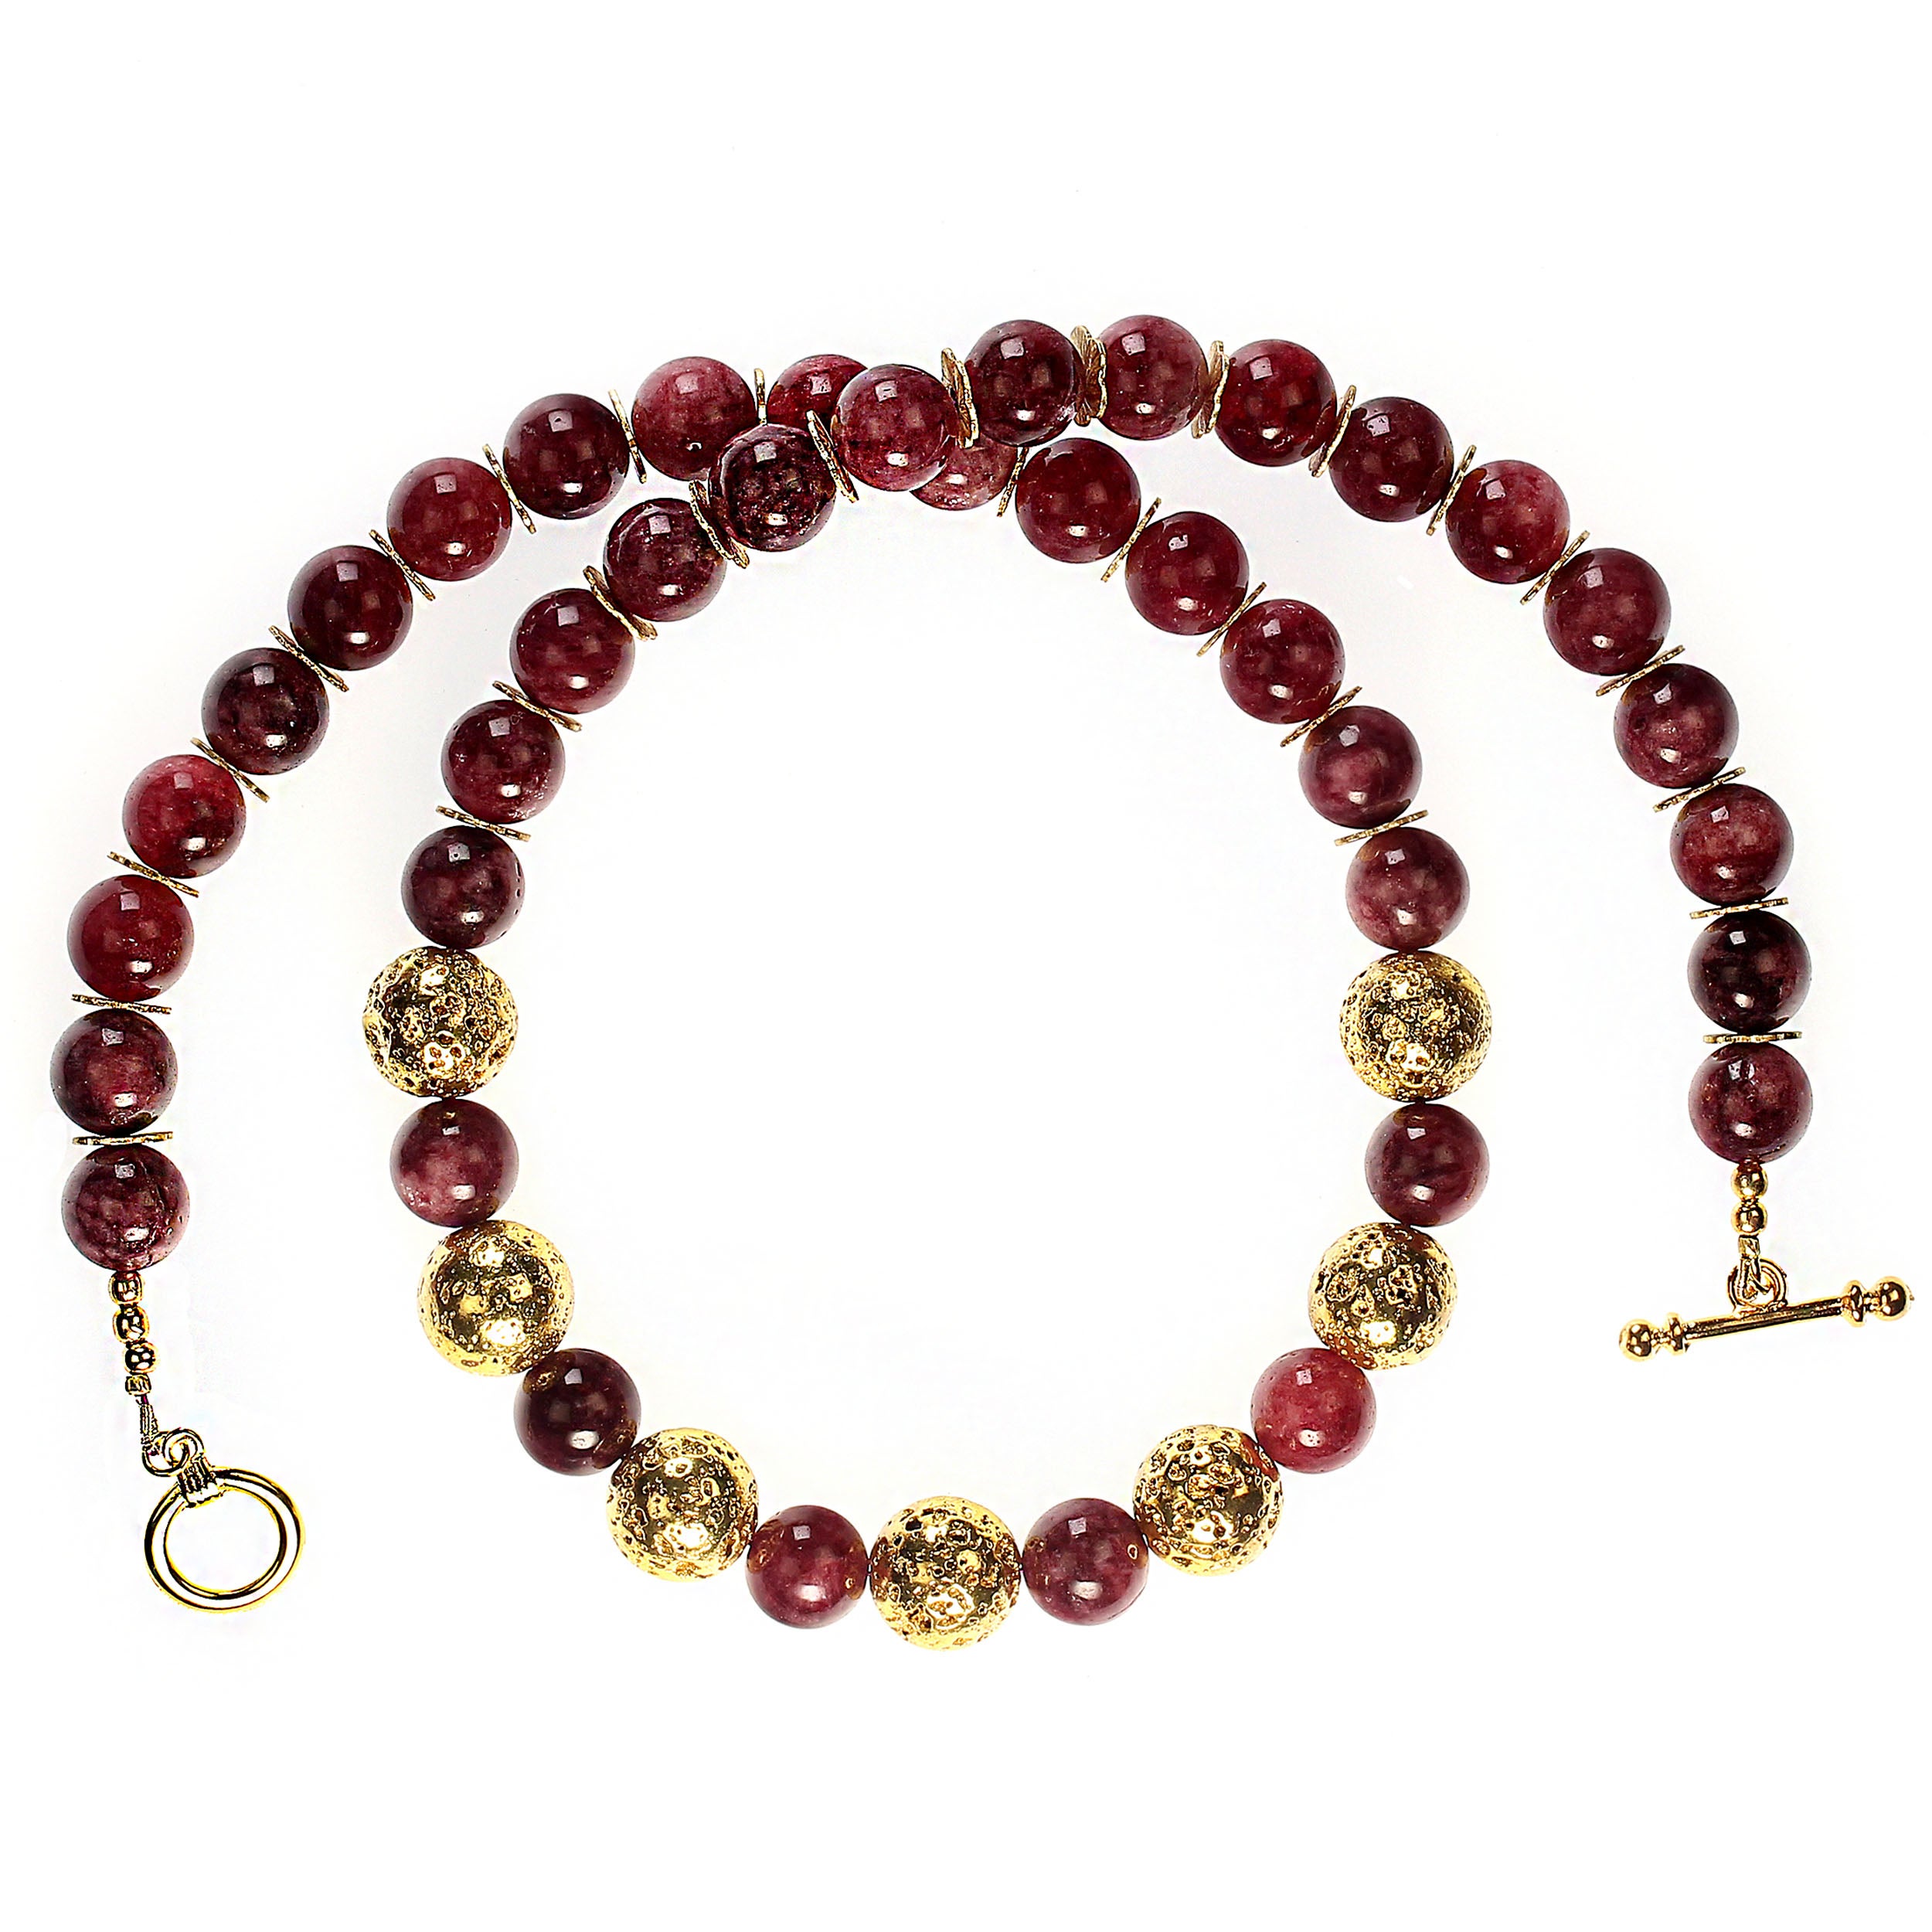 Artisan AJD 21 Inch Gorgeous Garnet Necklace Perfect for the January Birthday! For Sale